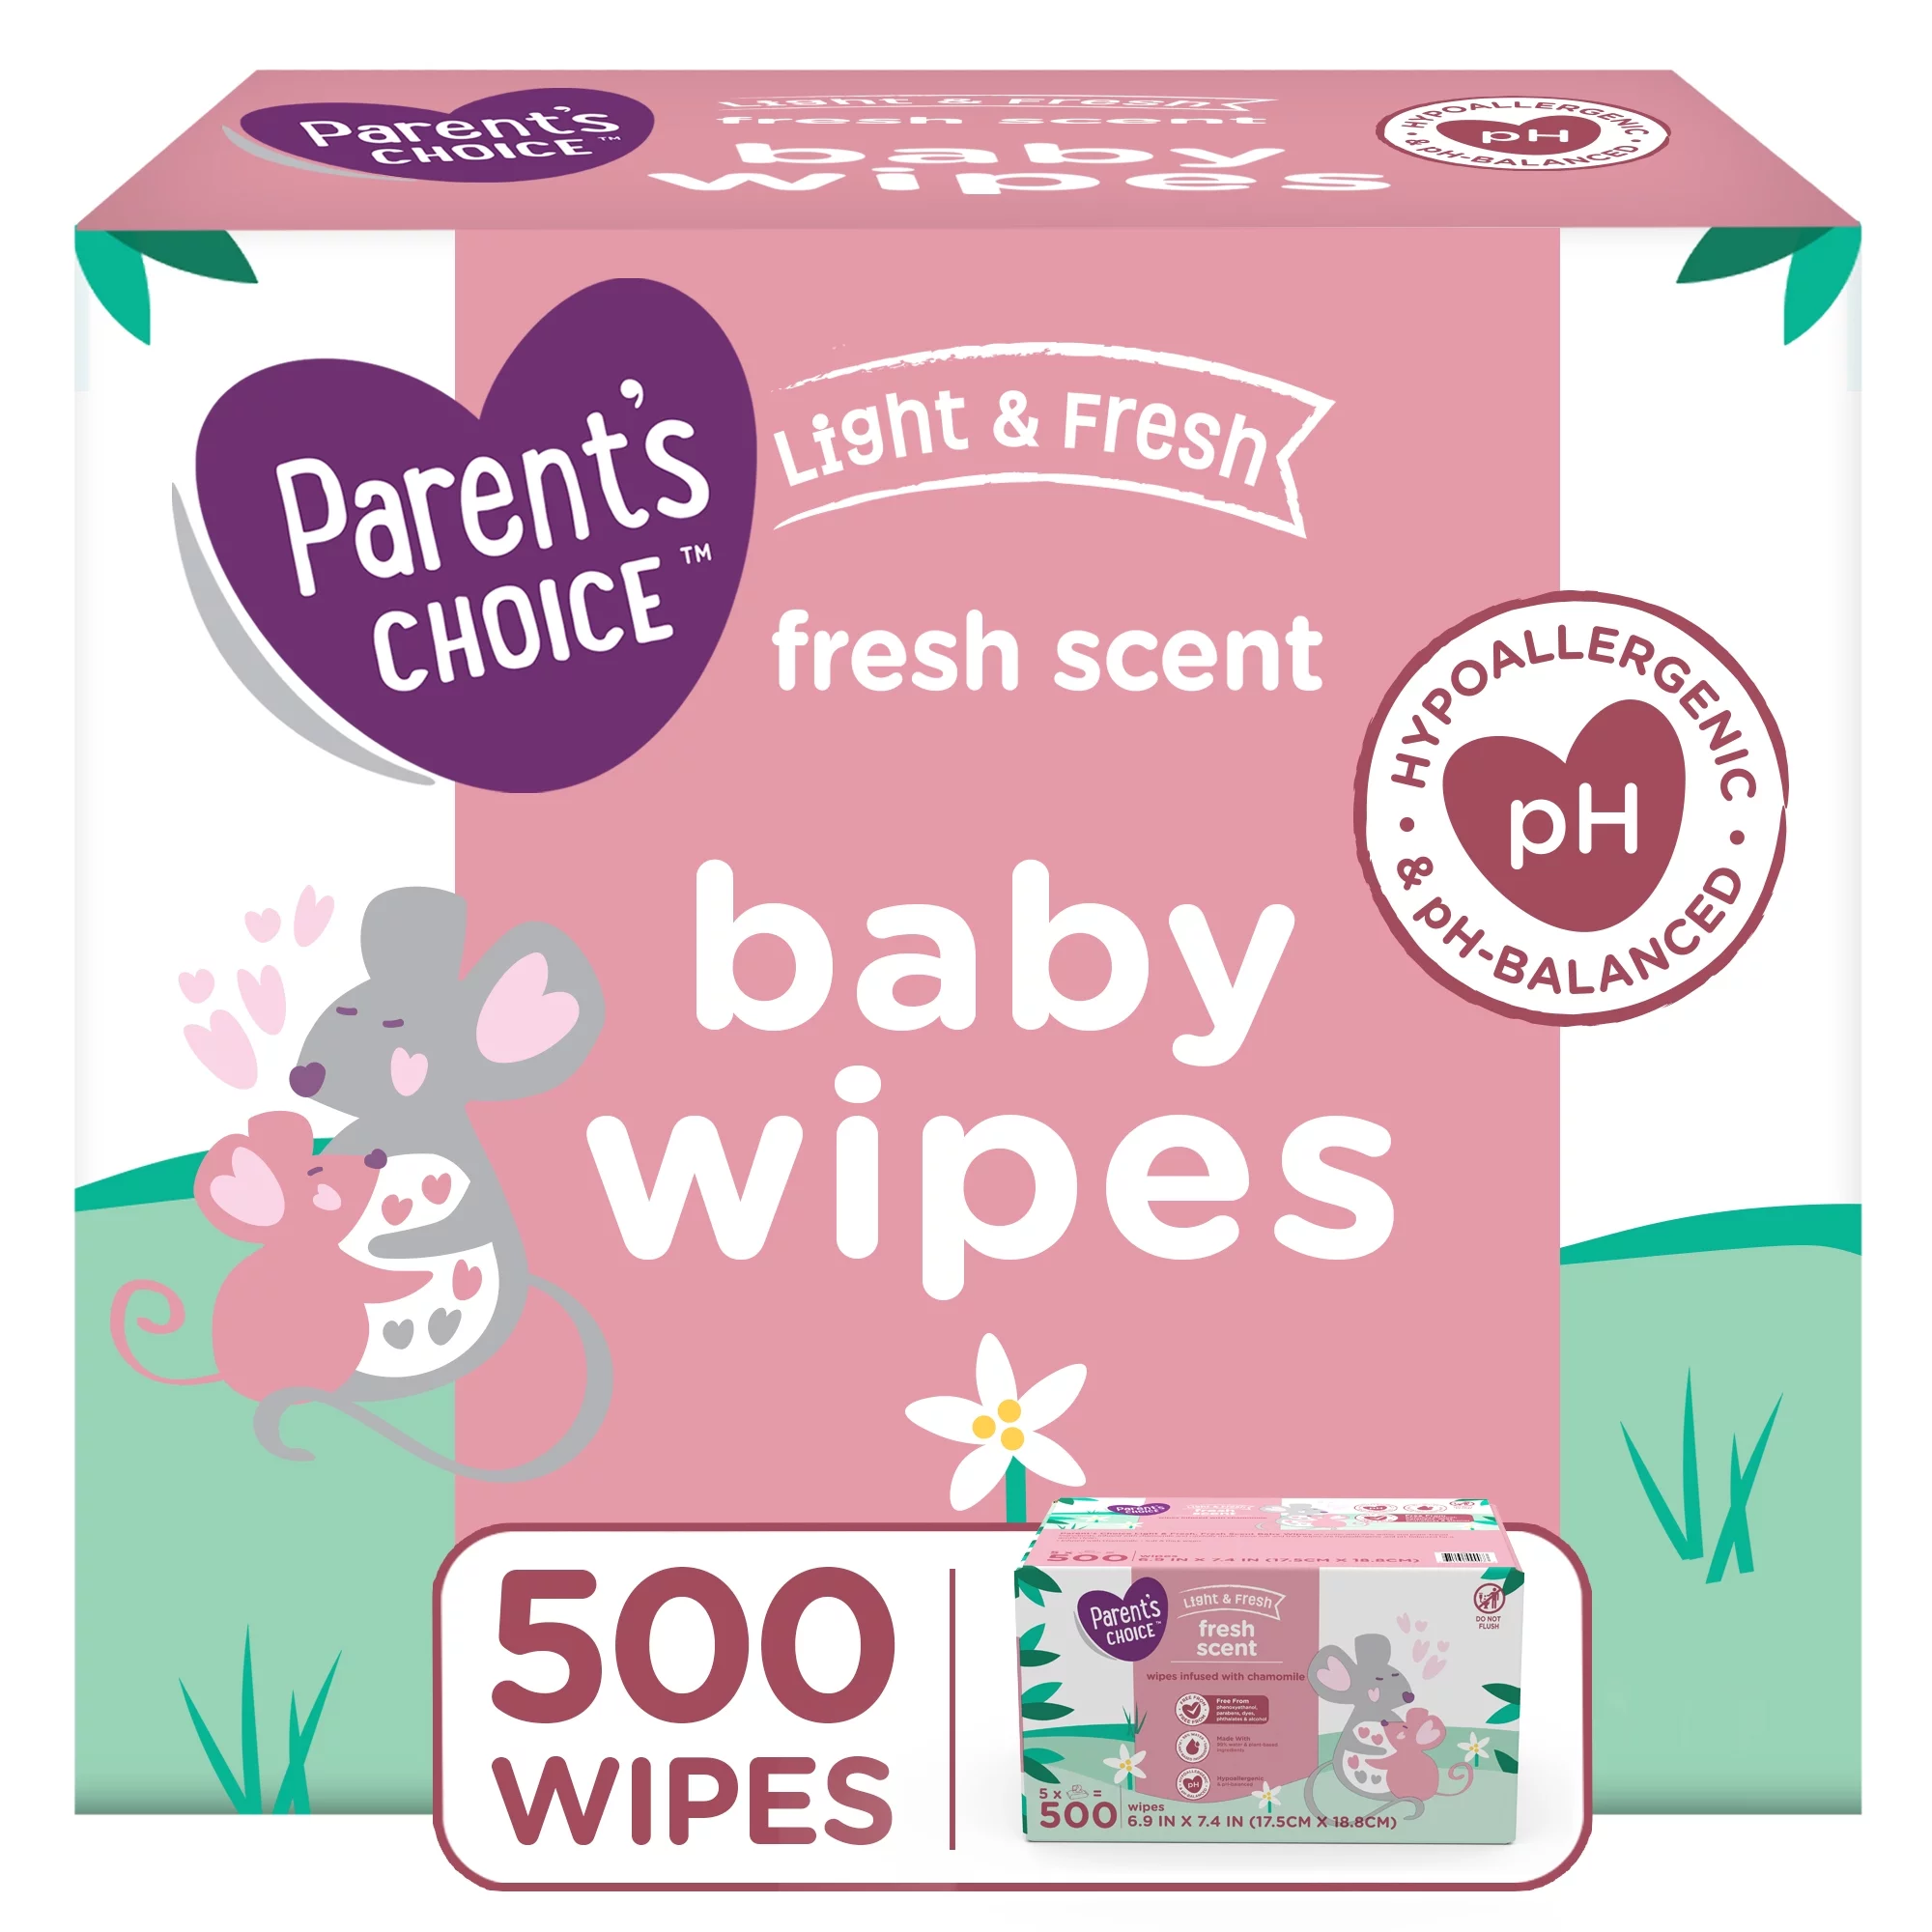 Parent's Choice Light & Fresh Baby Wipes, 5 Flip-Top Packs (500 Total Wipes)